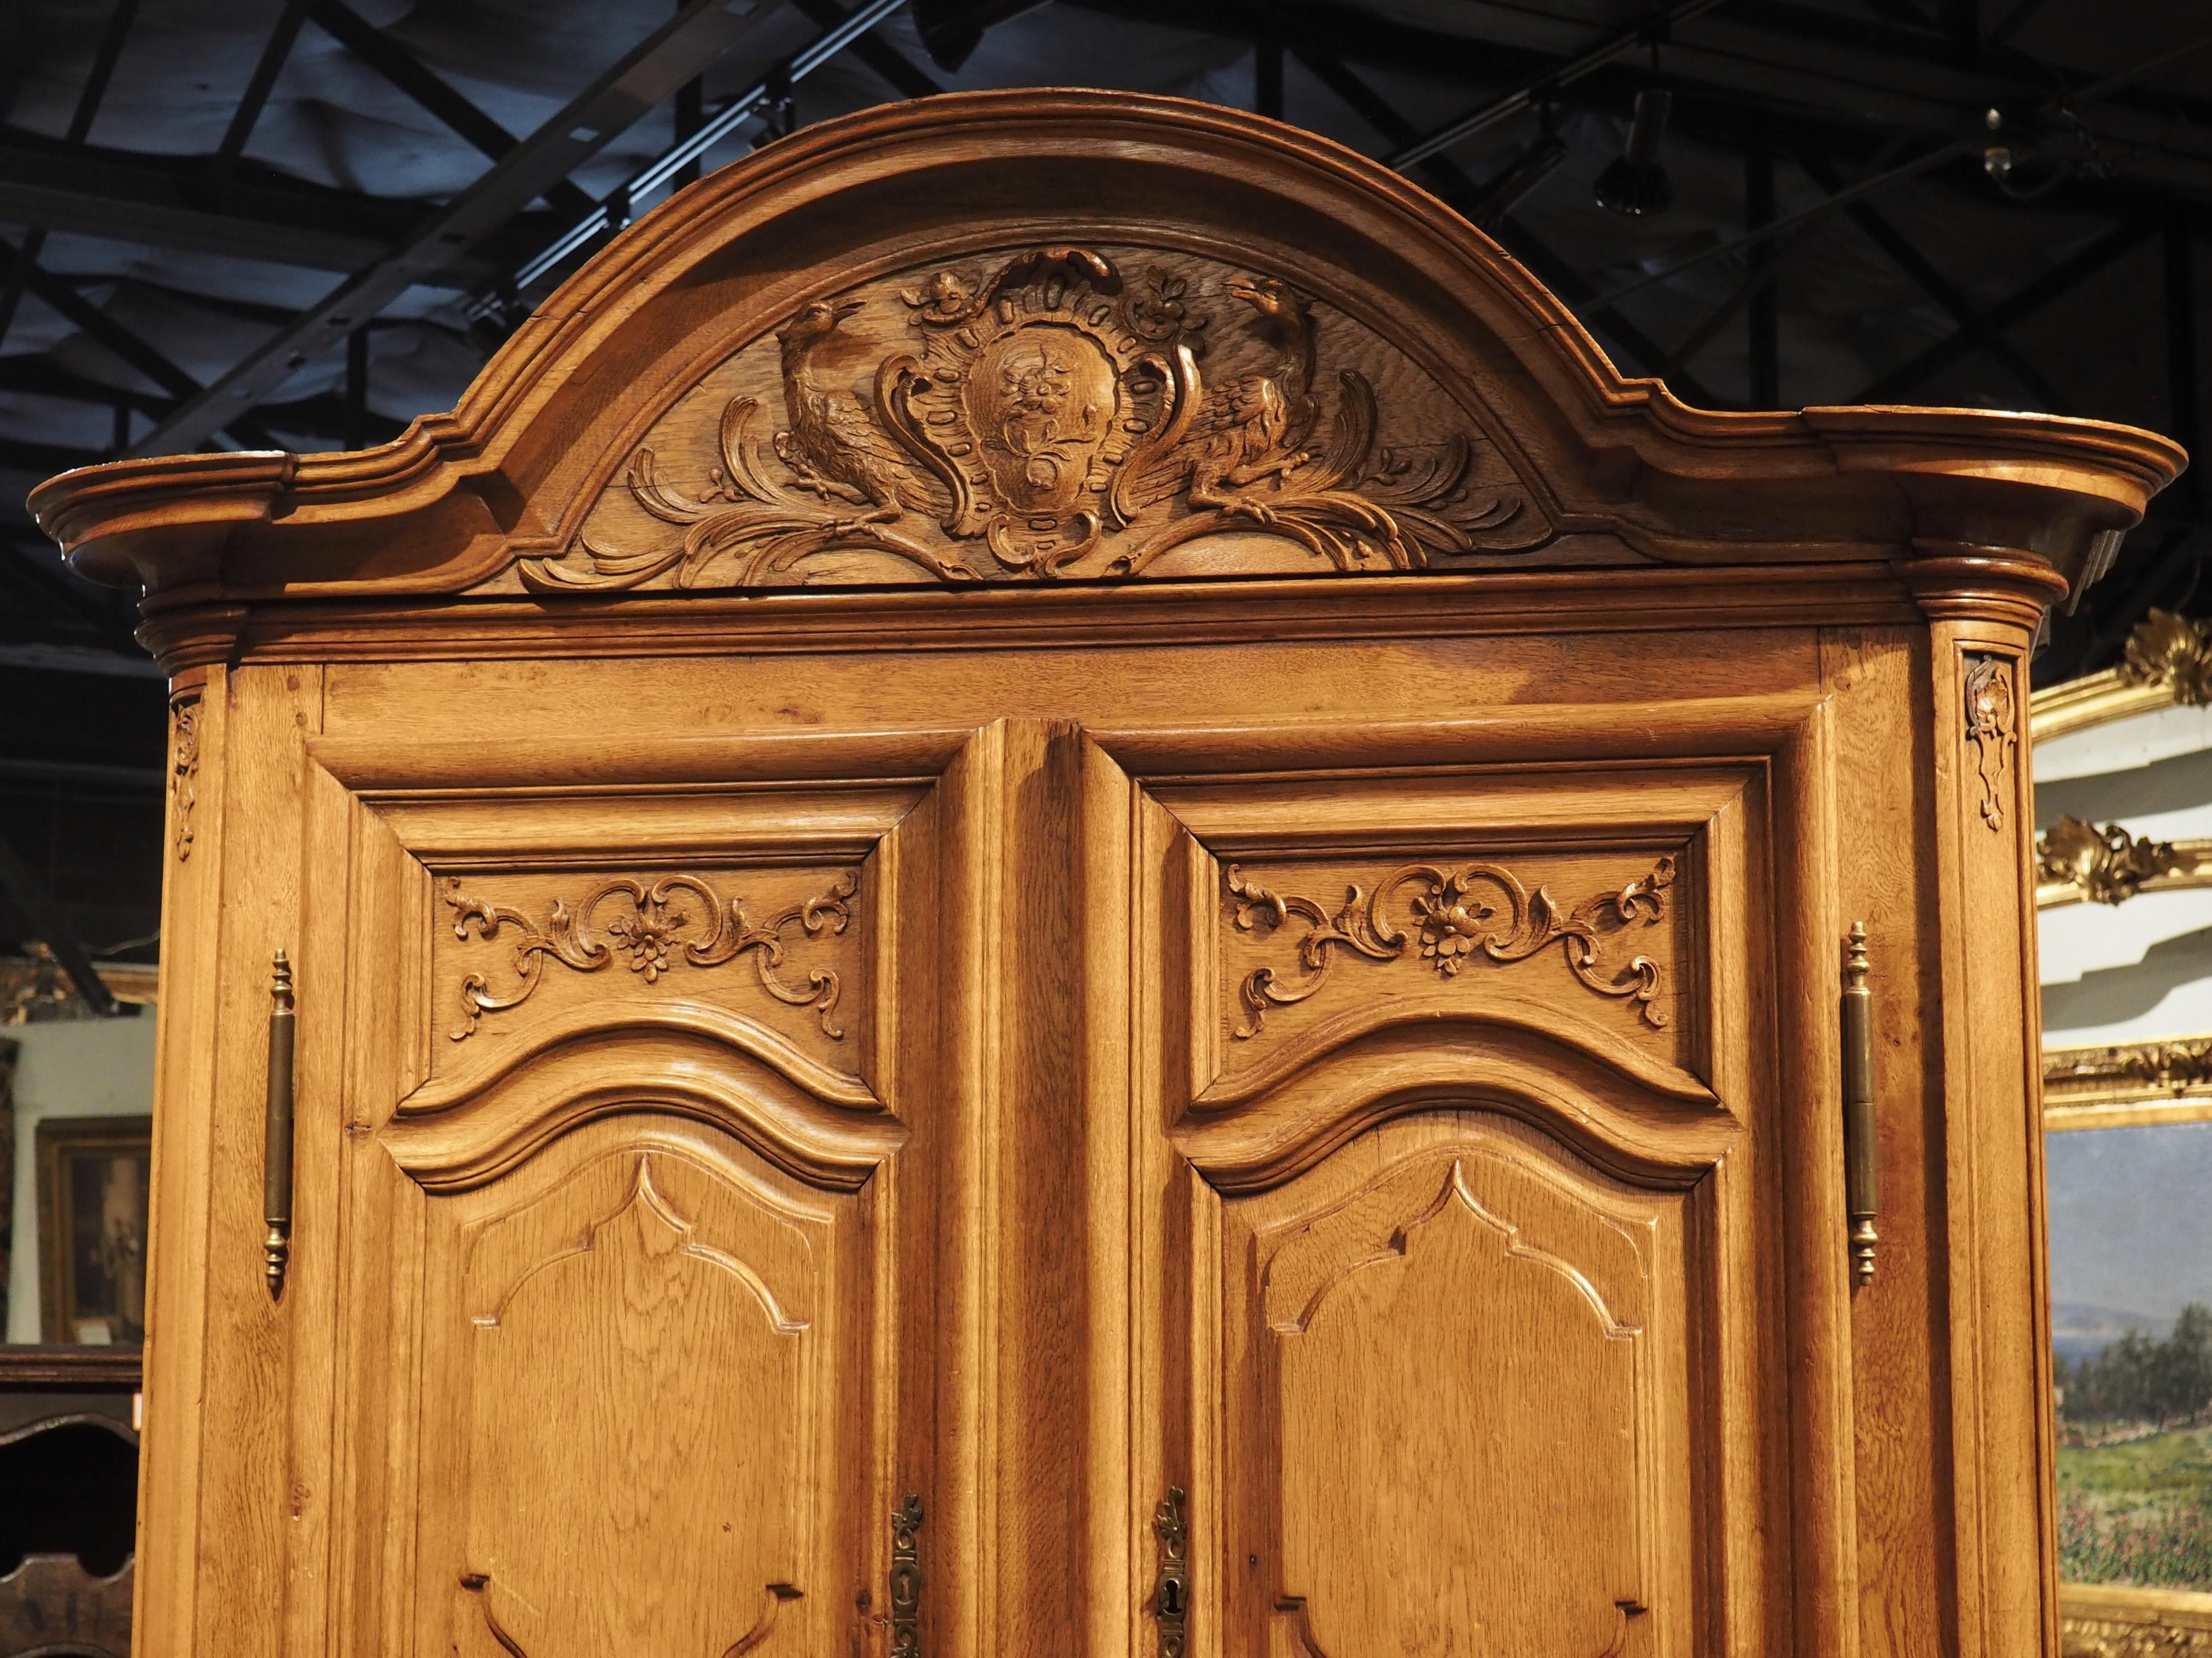 Colmar, where this handsome buffet deux corps was crafted, is an affluent commune in the Alsace region of France, a mere 15 miles from the German border. Because of this proximity, the hand-carved oak cabinet features some elements that were